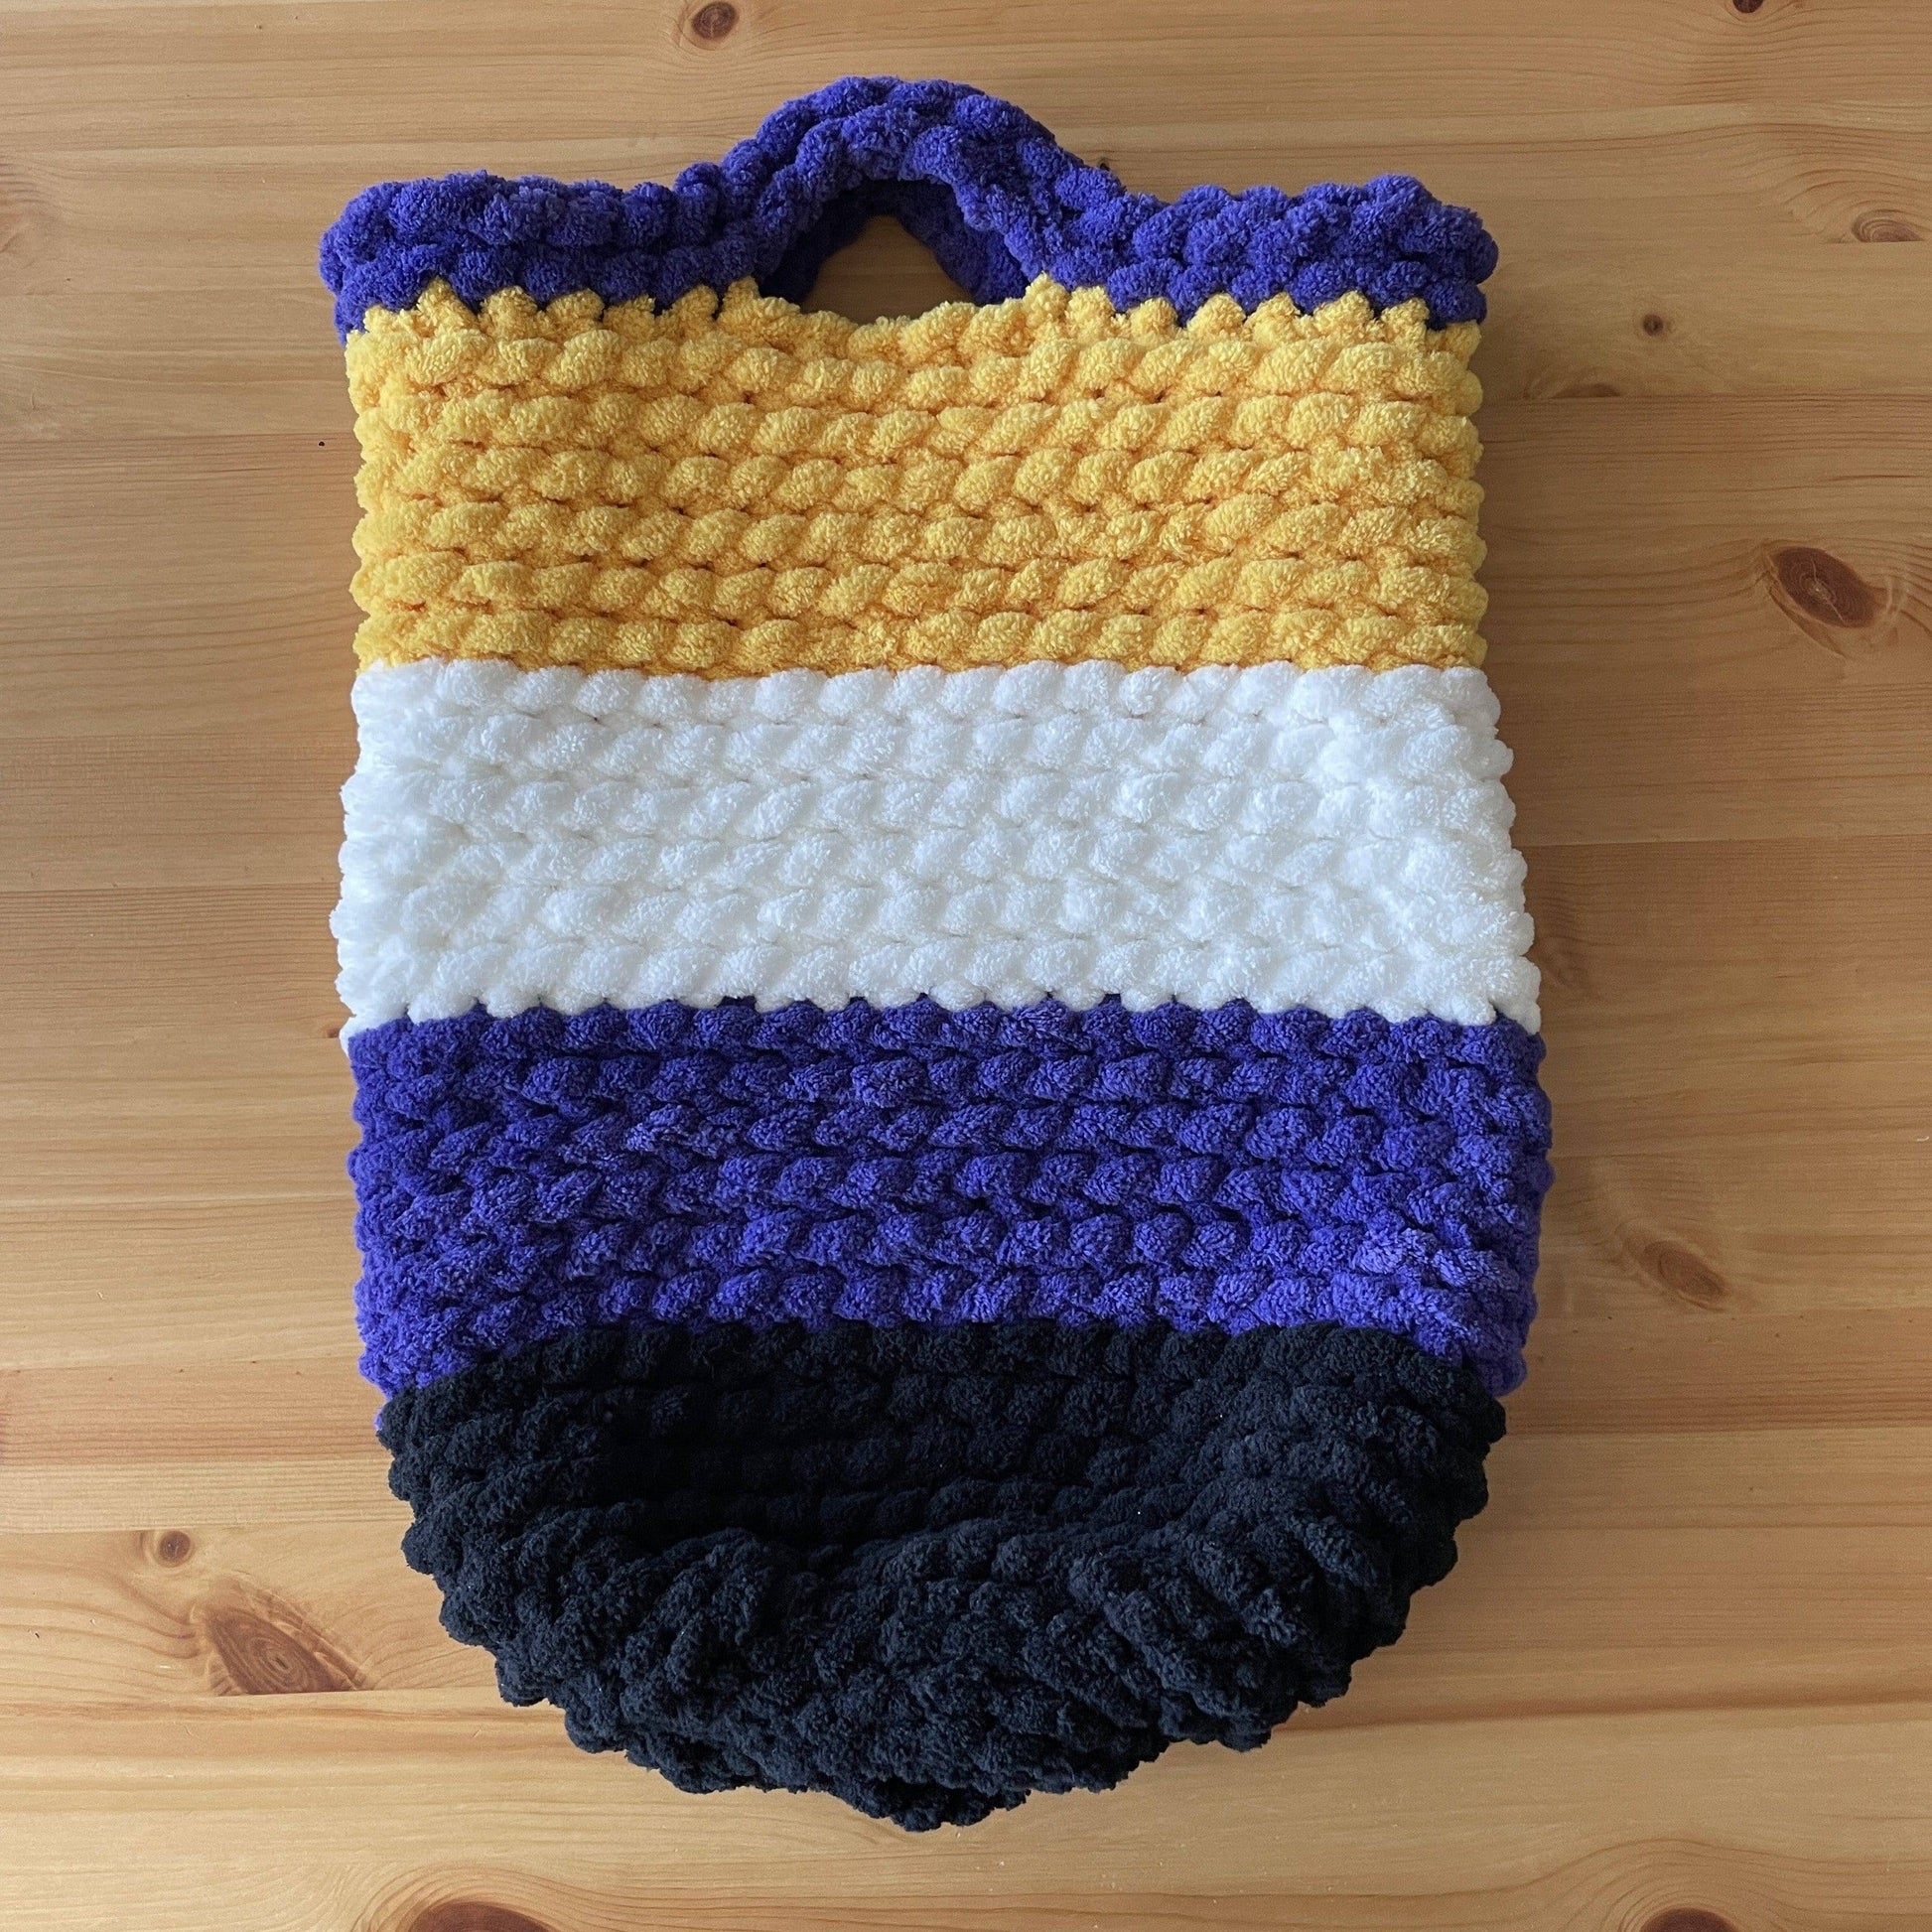 Knitted Non-Binary (Enby) Pride Bag - ILoveMyBlanket